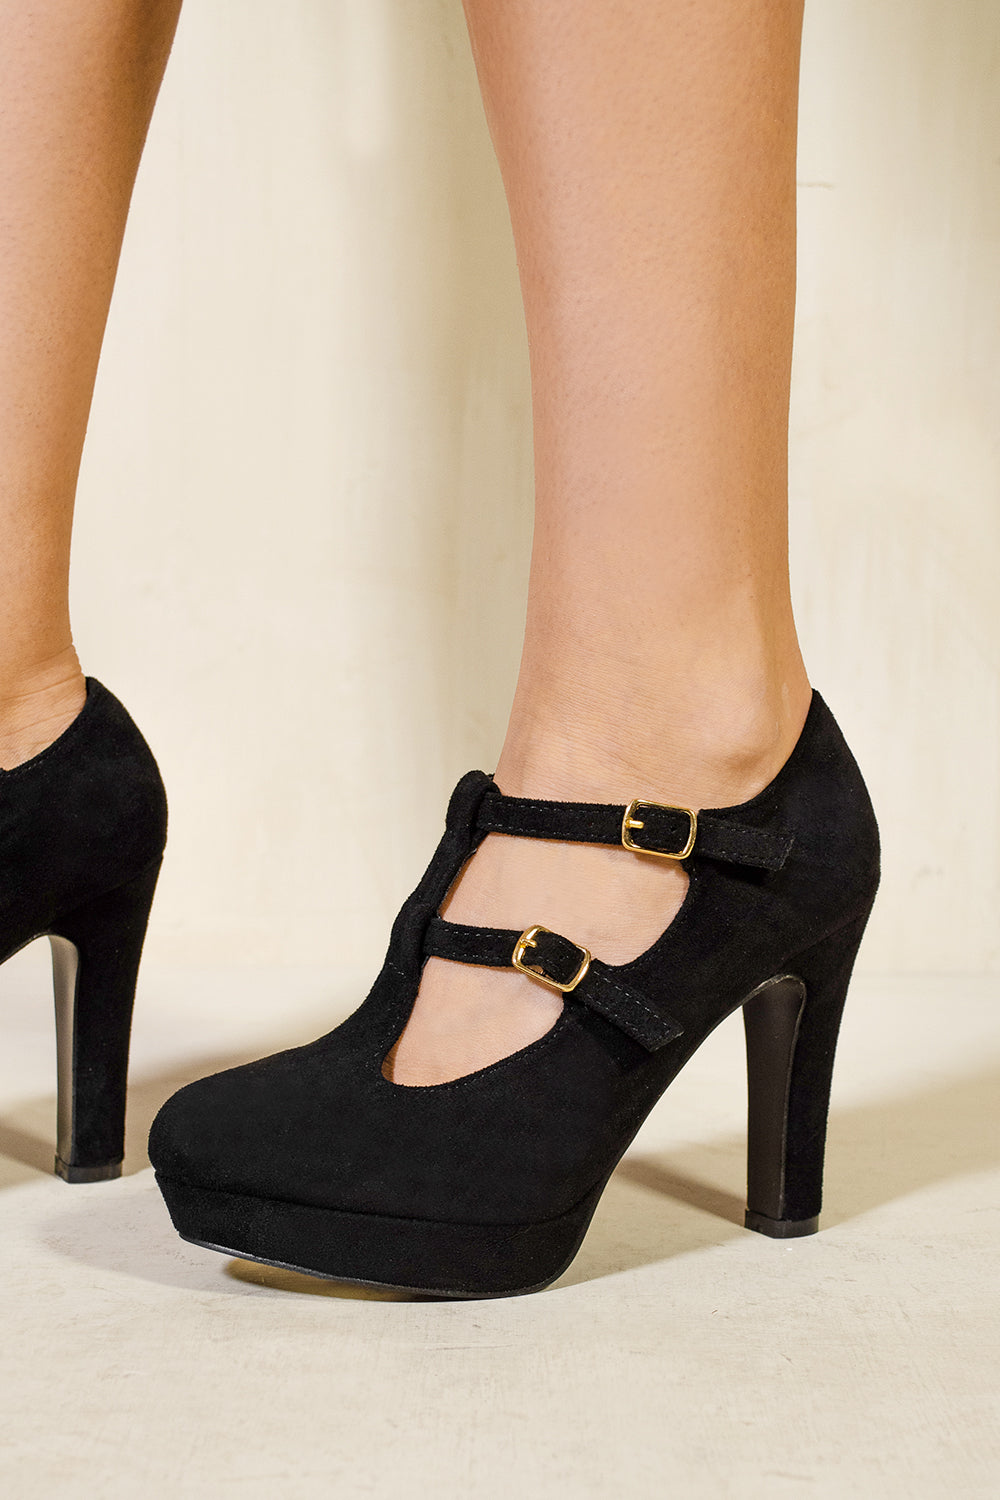 MARTHA CLOSED TOE HIGH HEEL SANDALS WITH STRAPS IN BLACK SUEDE